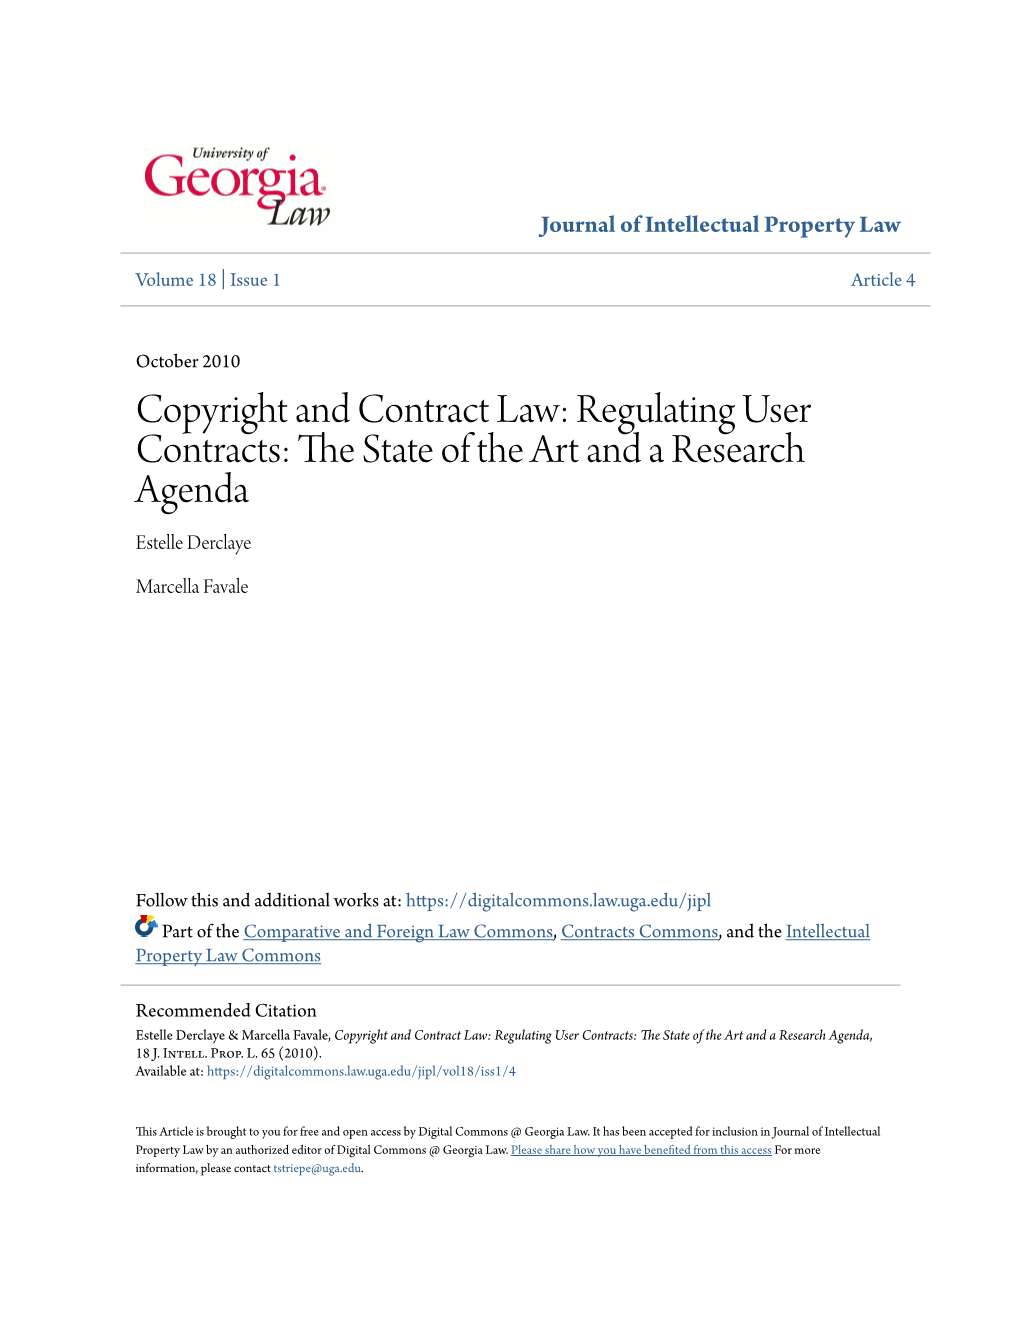 Copyright and Contract Law: Regulating User Contracts: the Ts Ate of the Art and a Research Agenda Estelle Derclaye